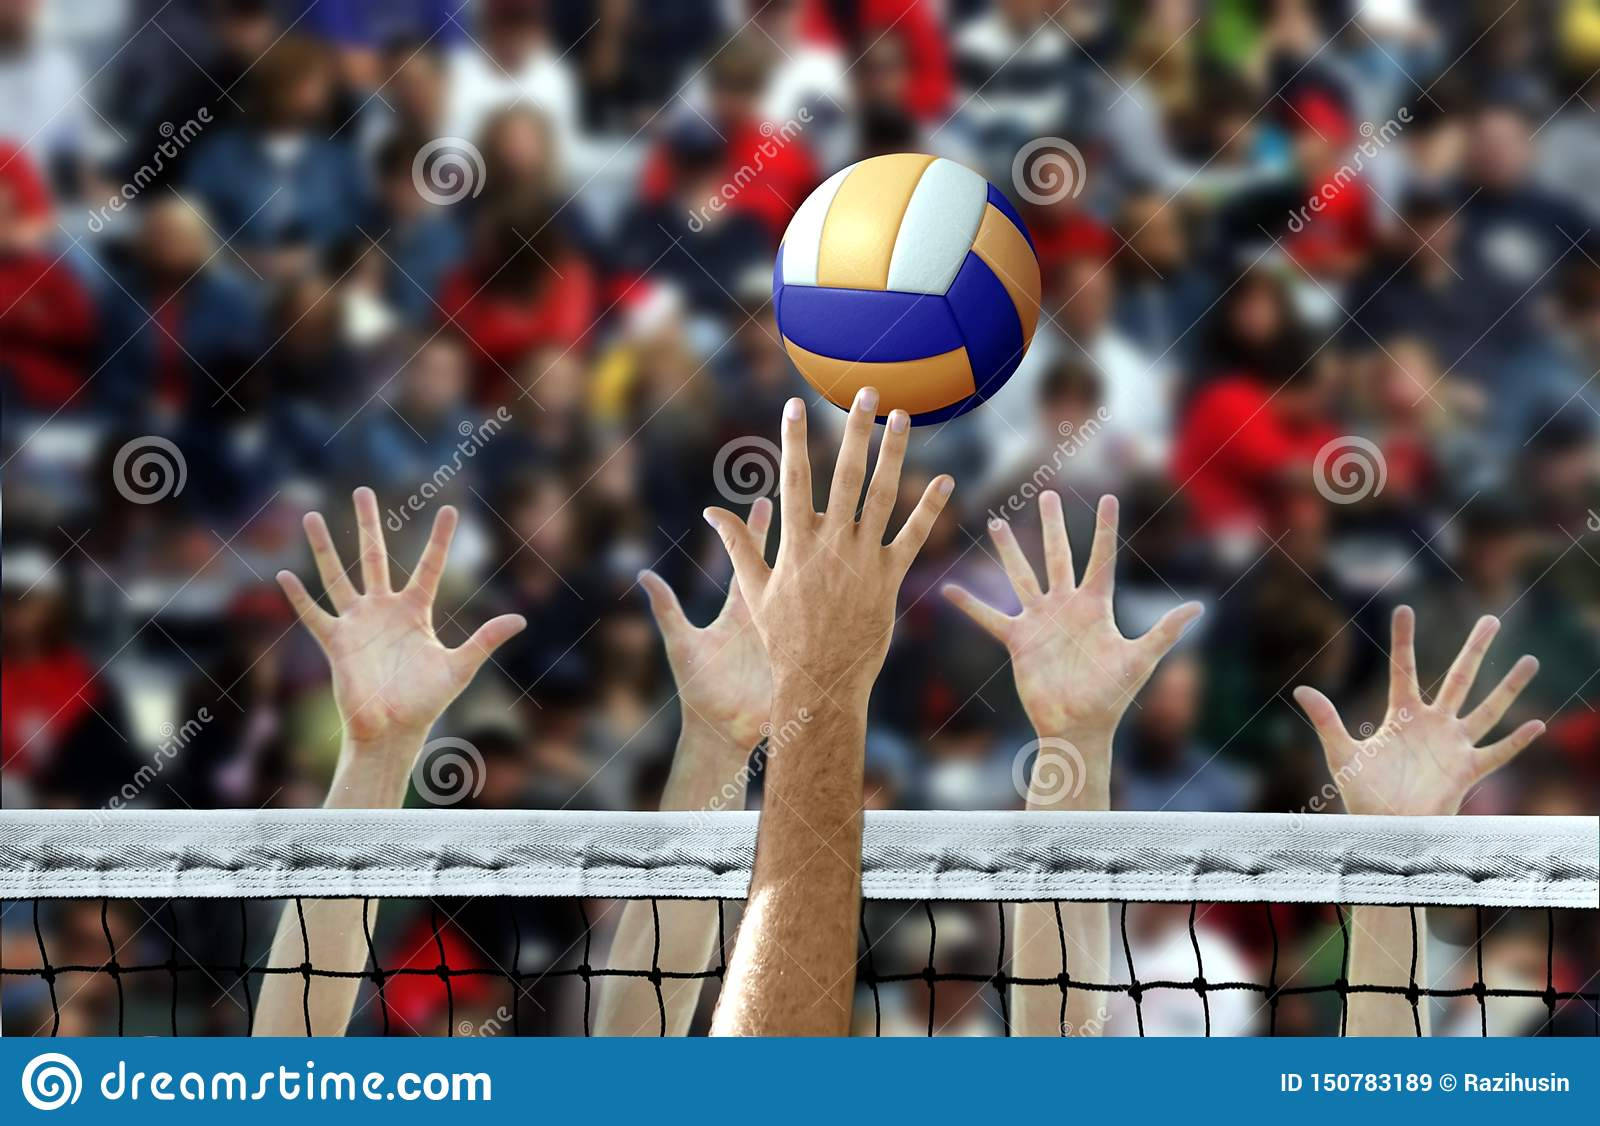 Volleyball Ball Reaching Hands Of People In The Crowd Wallpaper